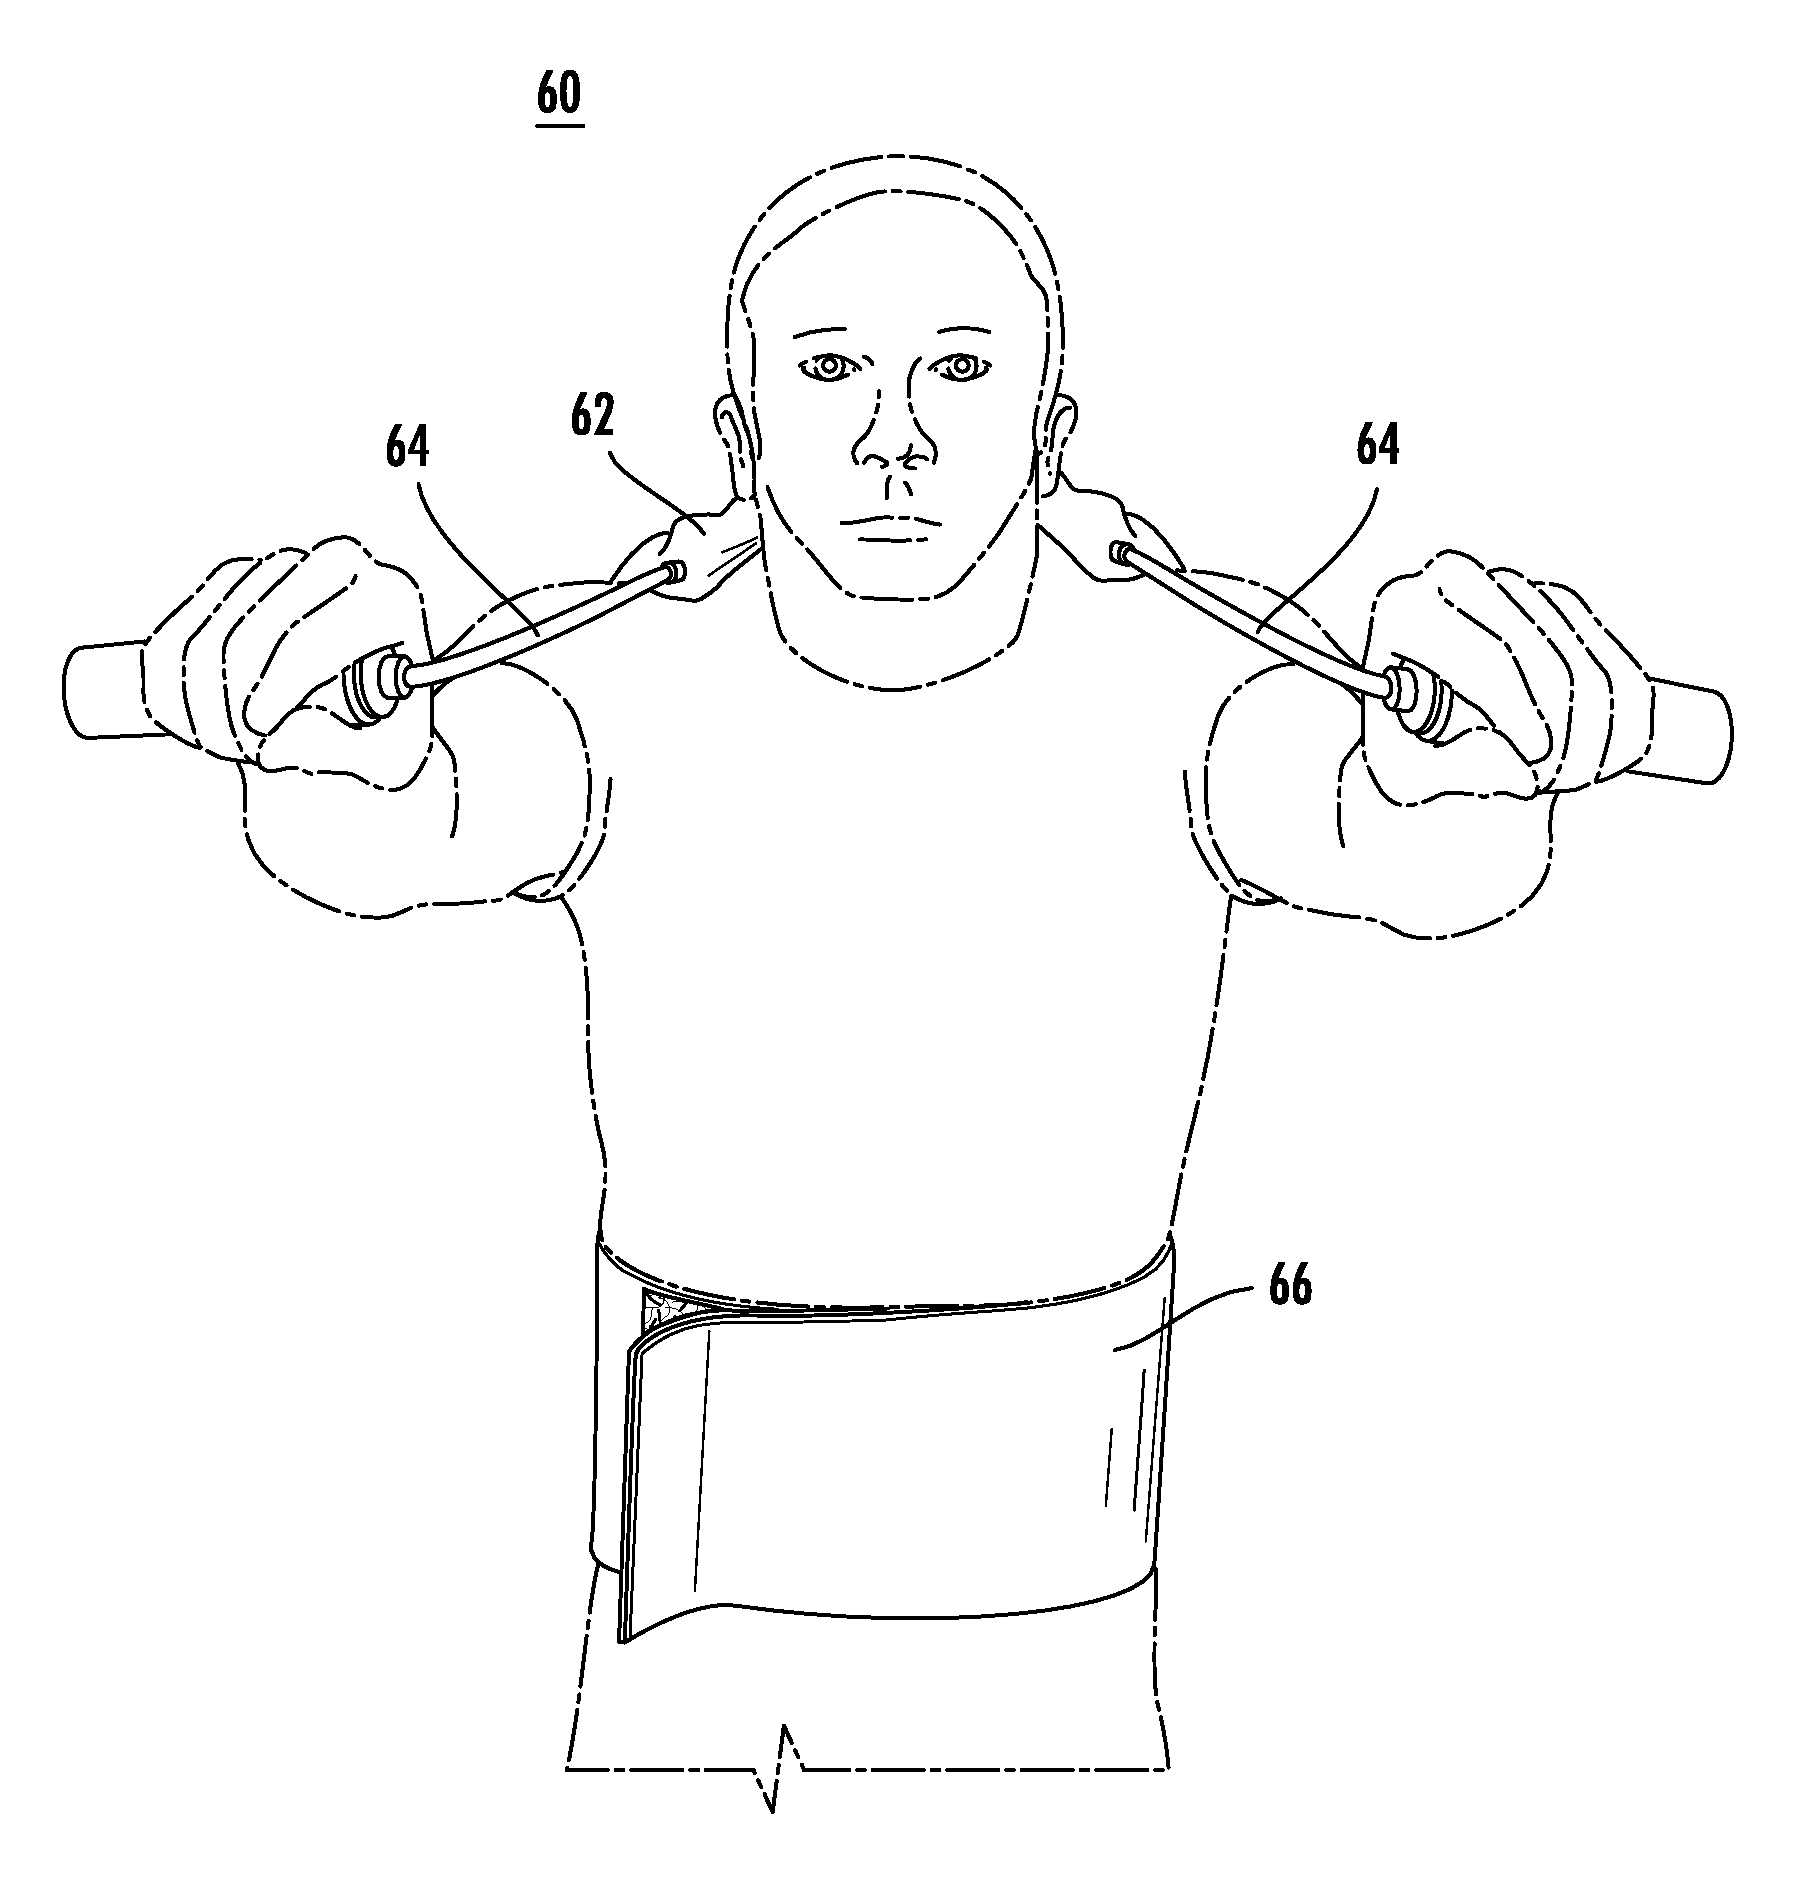 Exercise and training apparatus